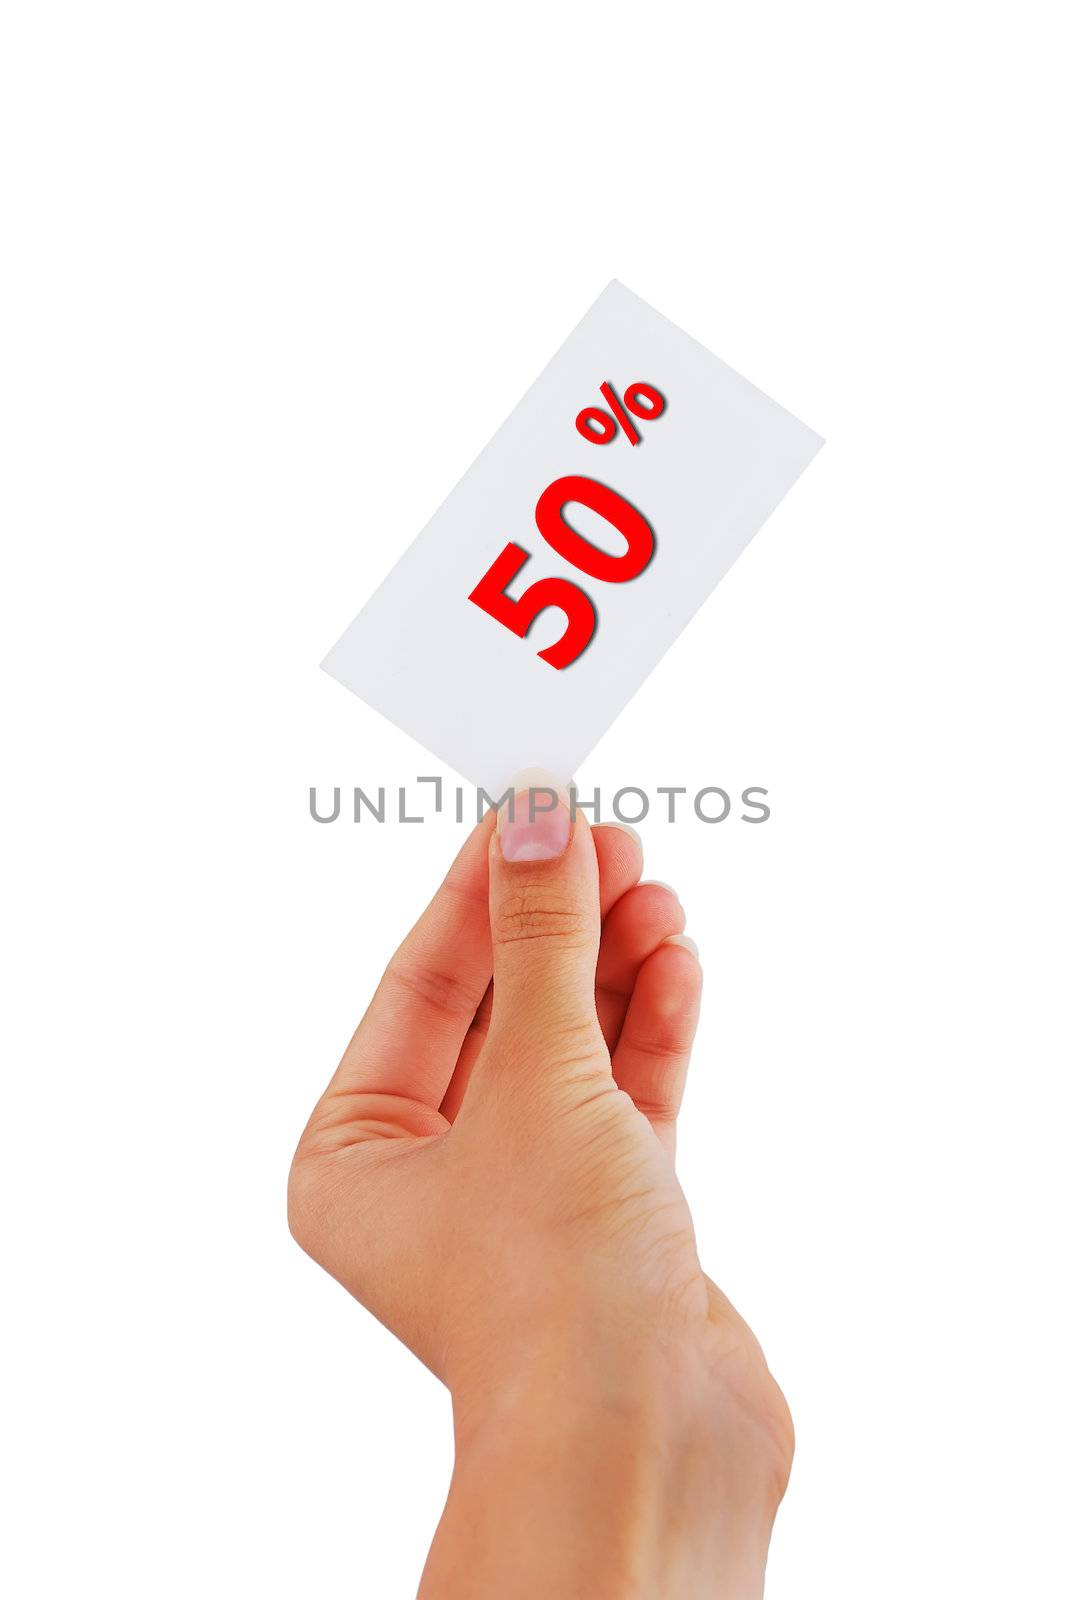 label discount in hand on a white background